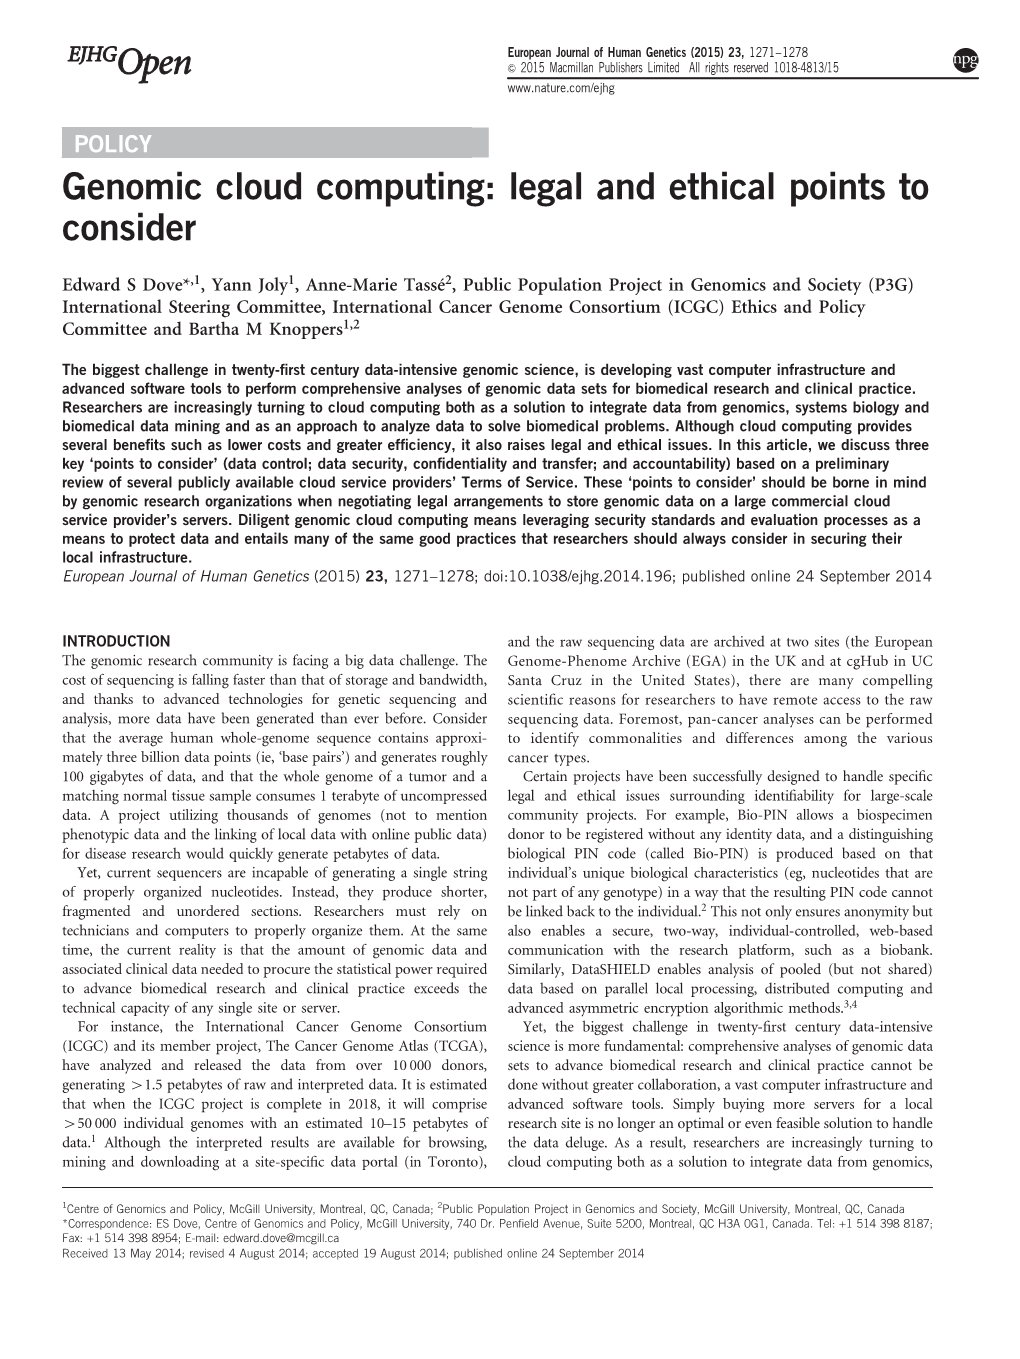 Genomic Cloud Computing: Legal and Ethical Points to Consider